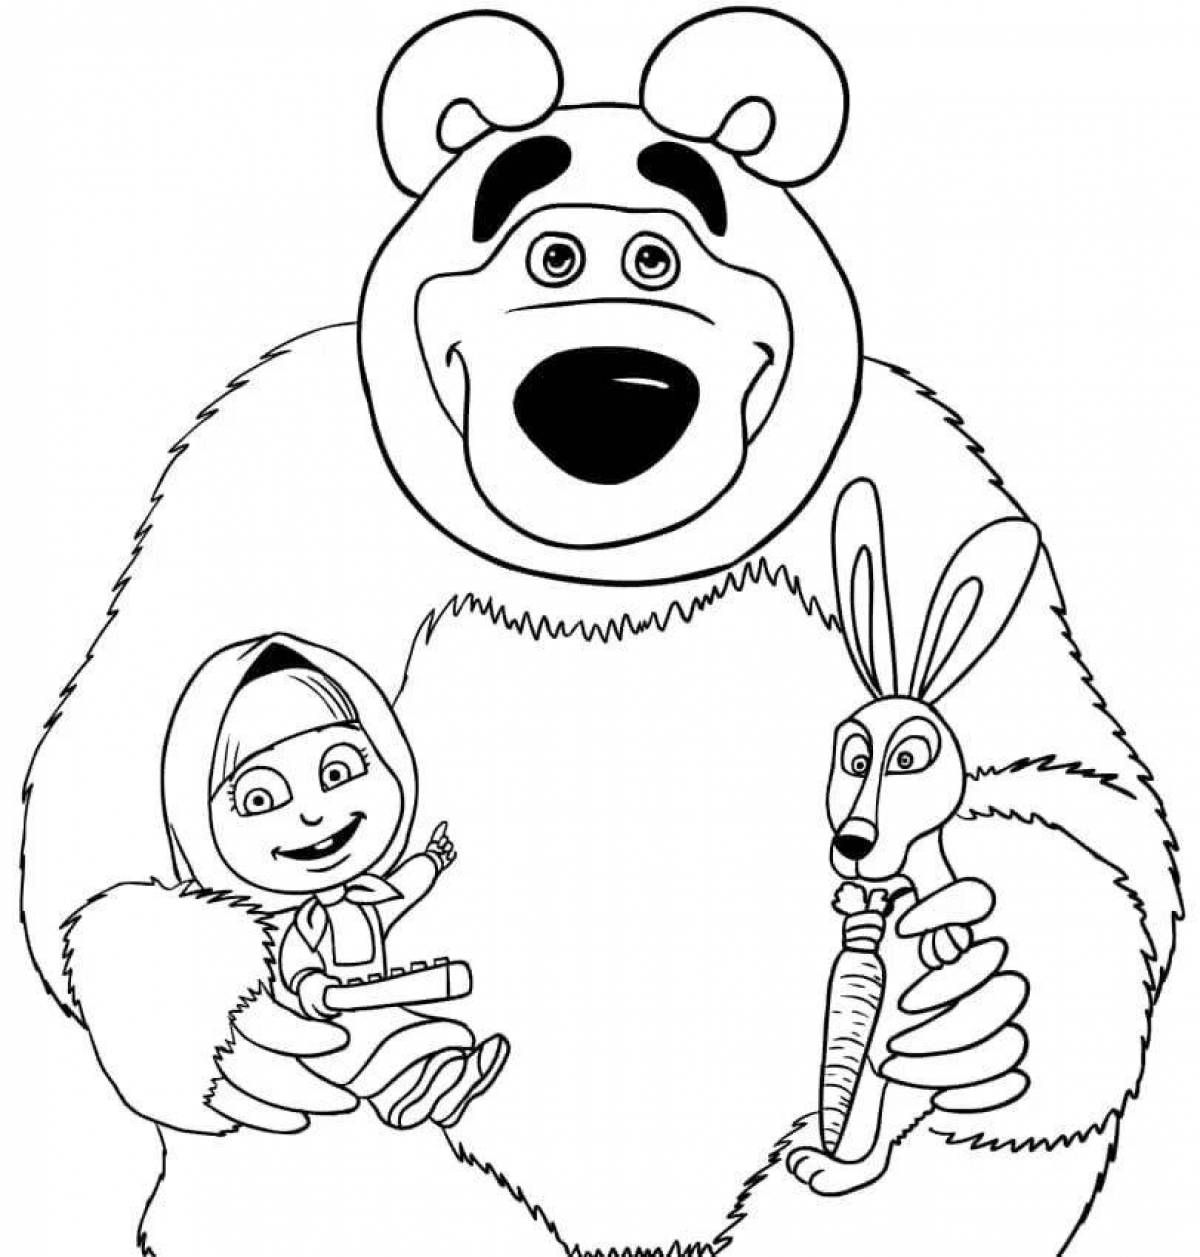 Exciting drawing of masha and the bear